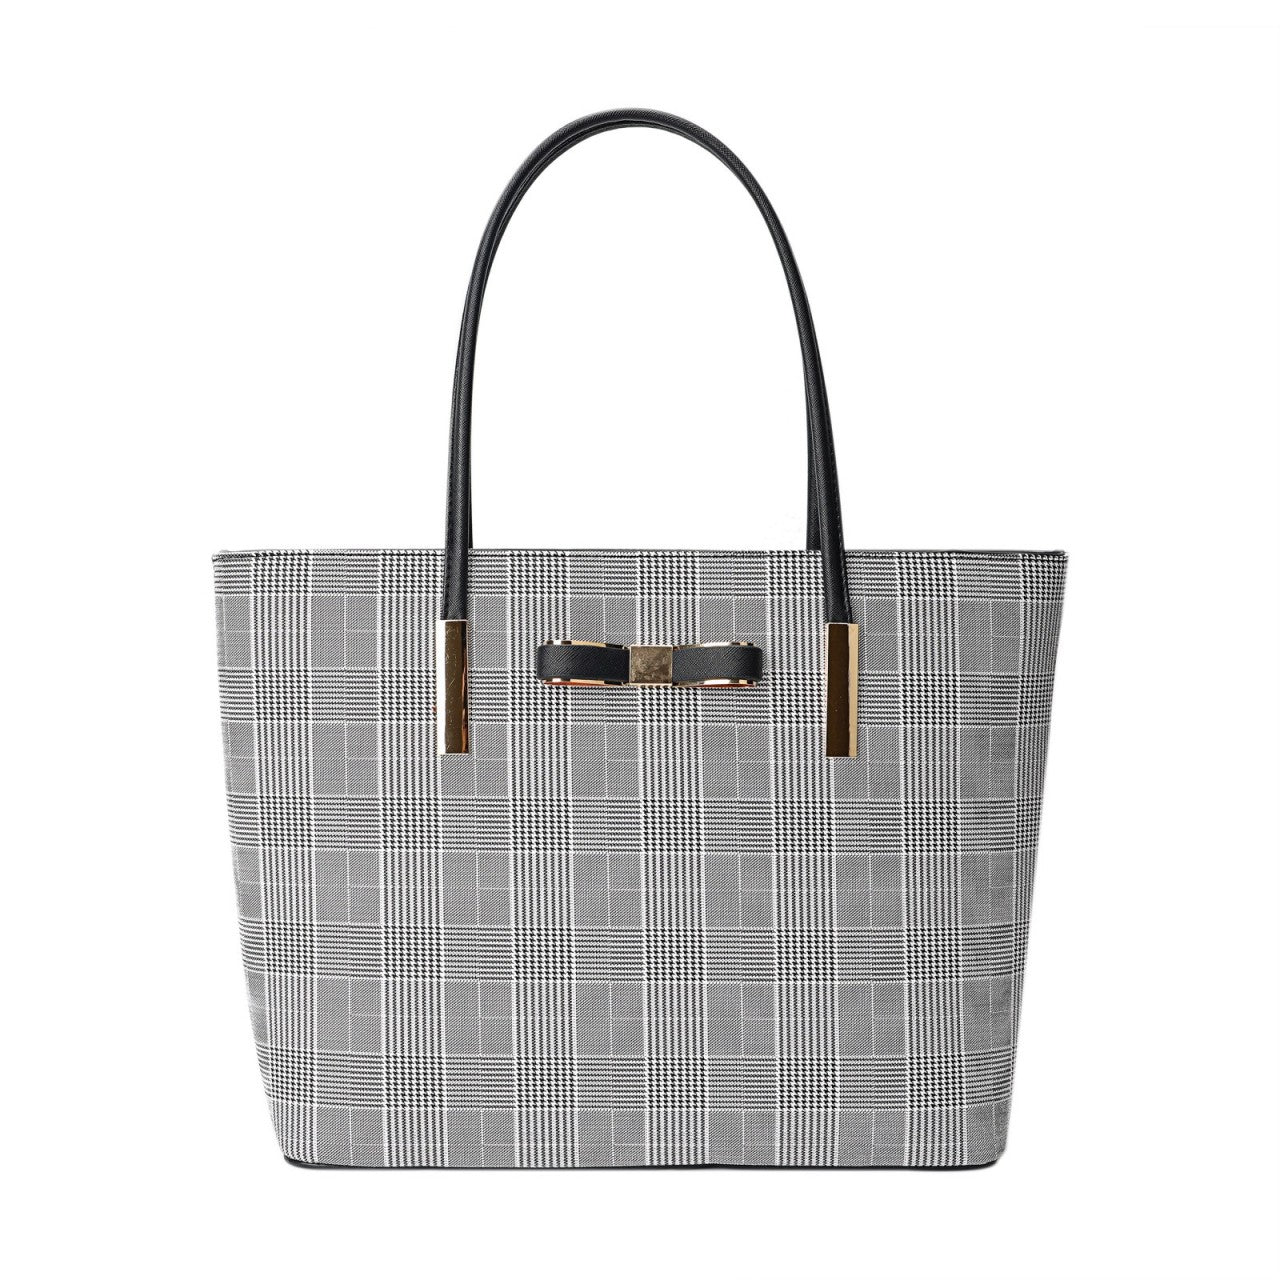 LYDC Bow Details Large Tote / Shoulder Bag with CHECKERED pattern